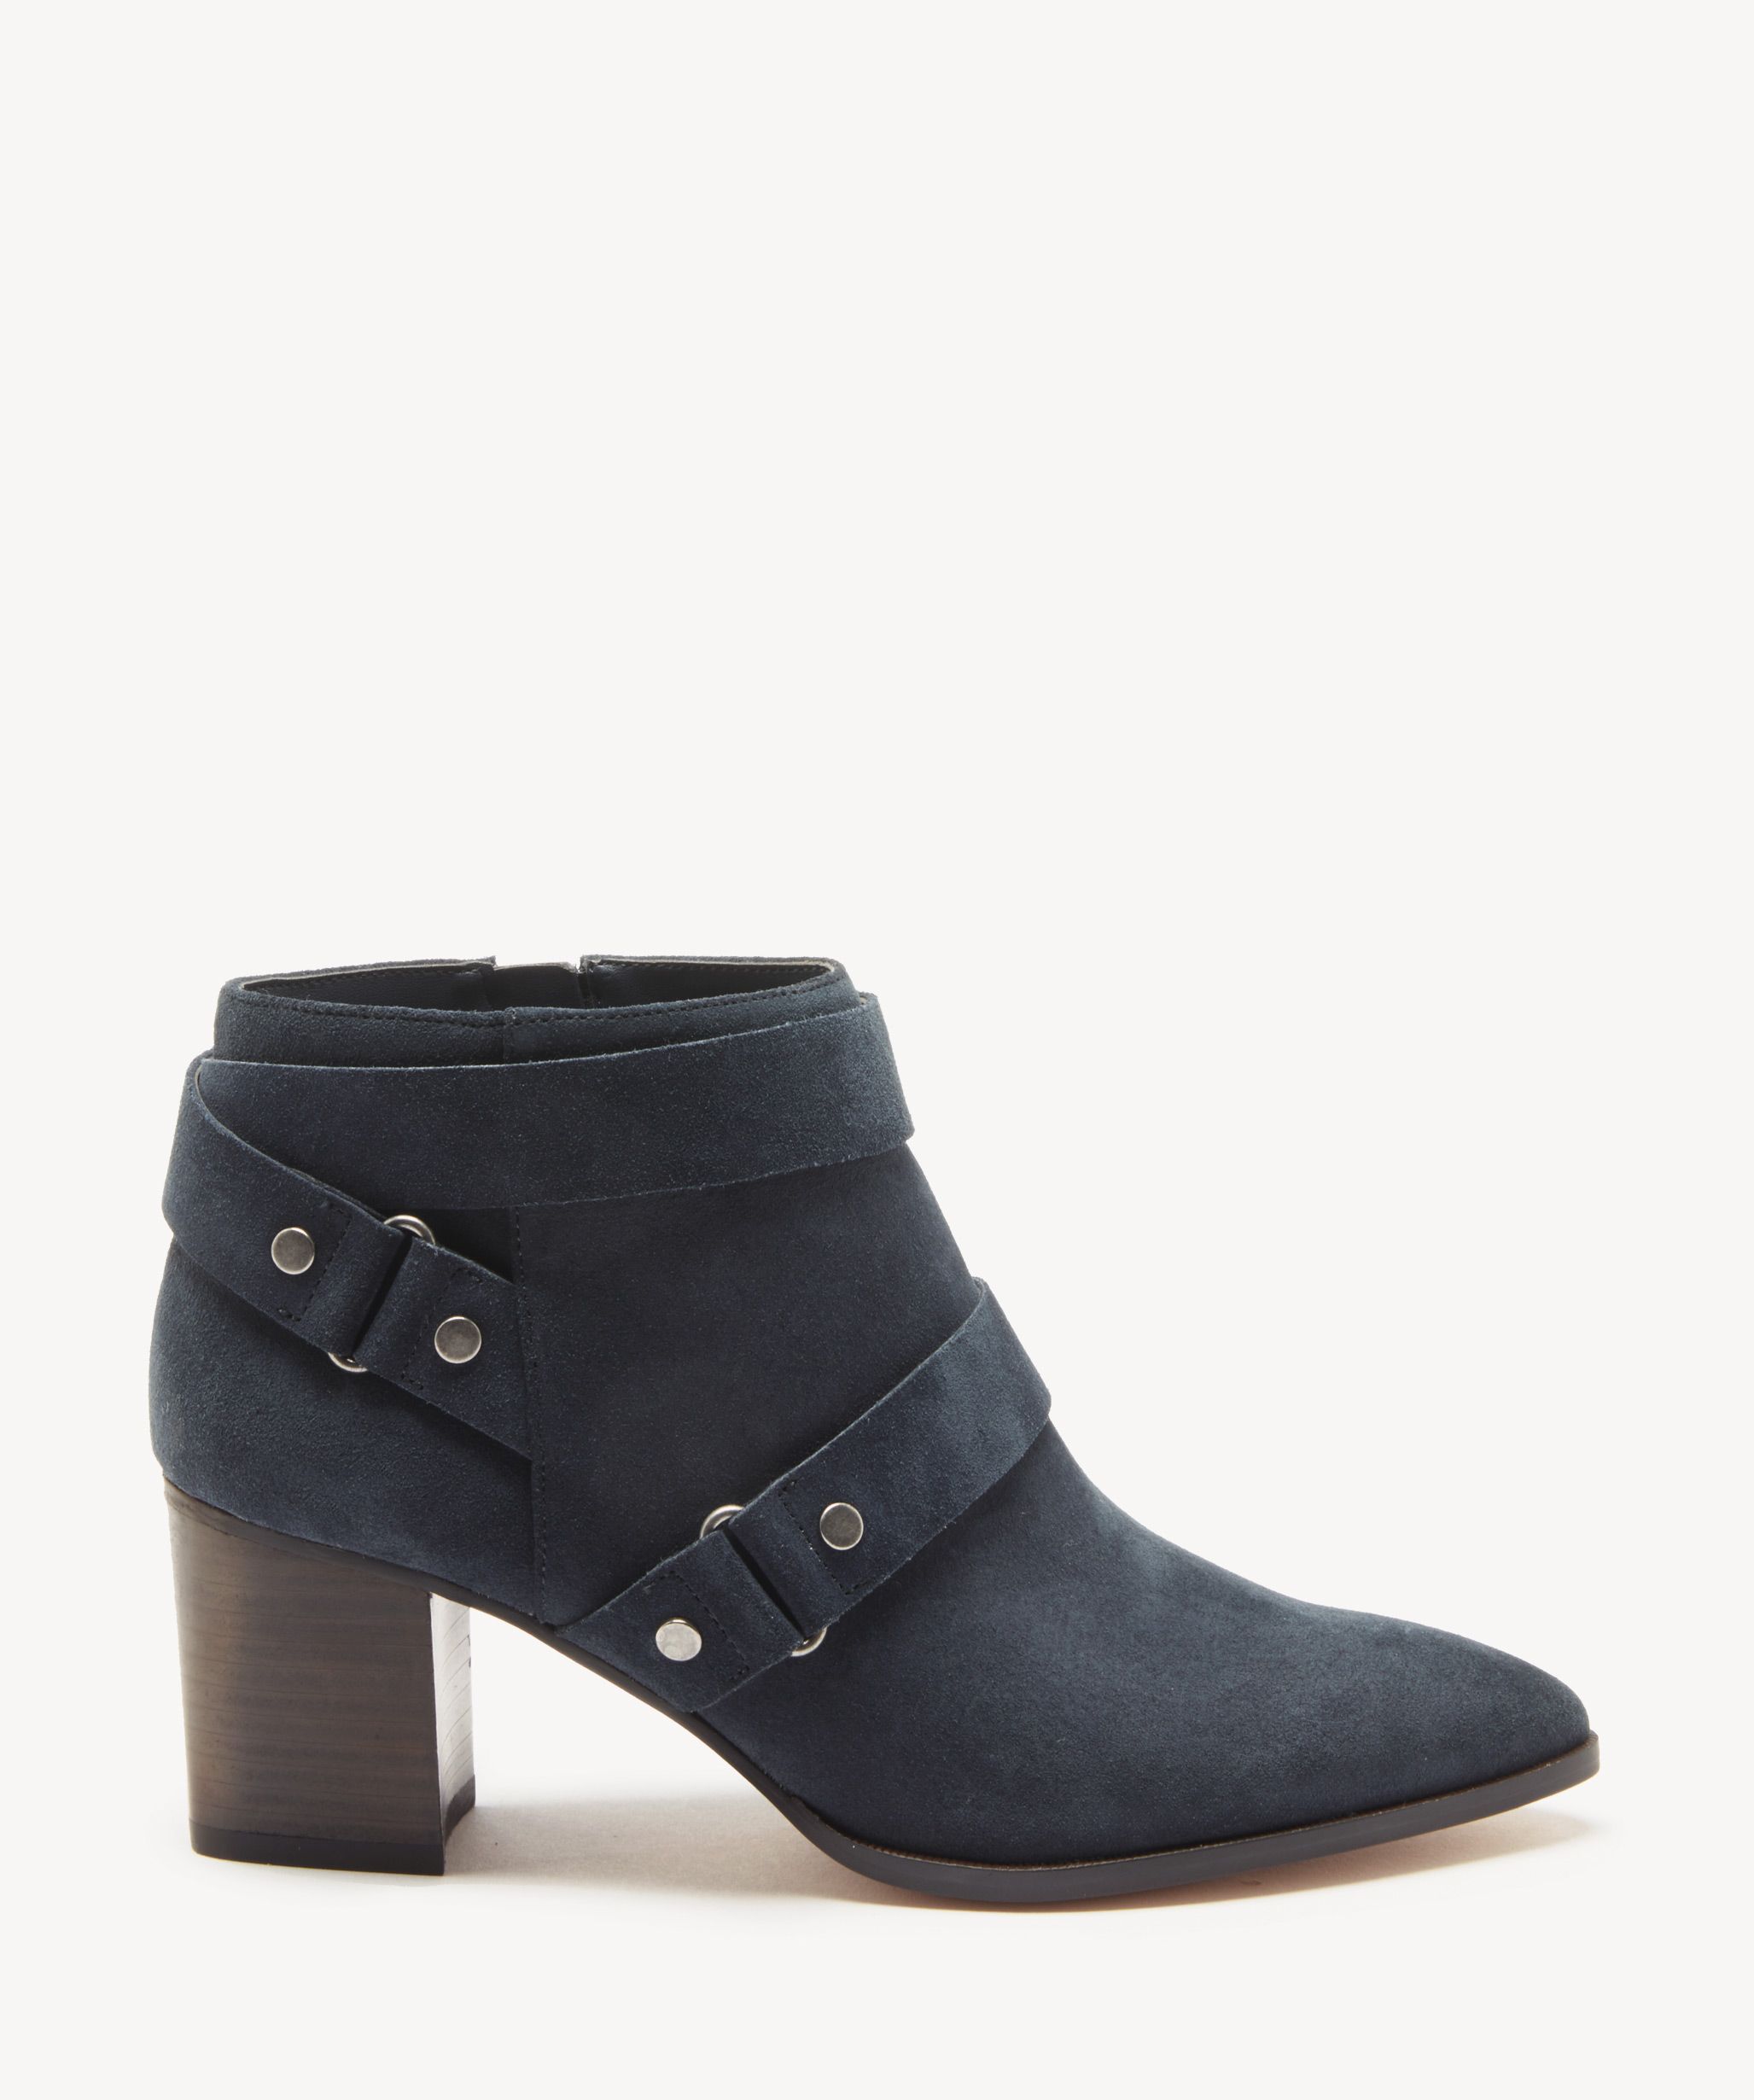 Sole Society: Dariela Ankle Bootie - $100 